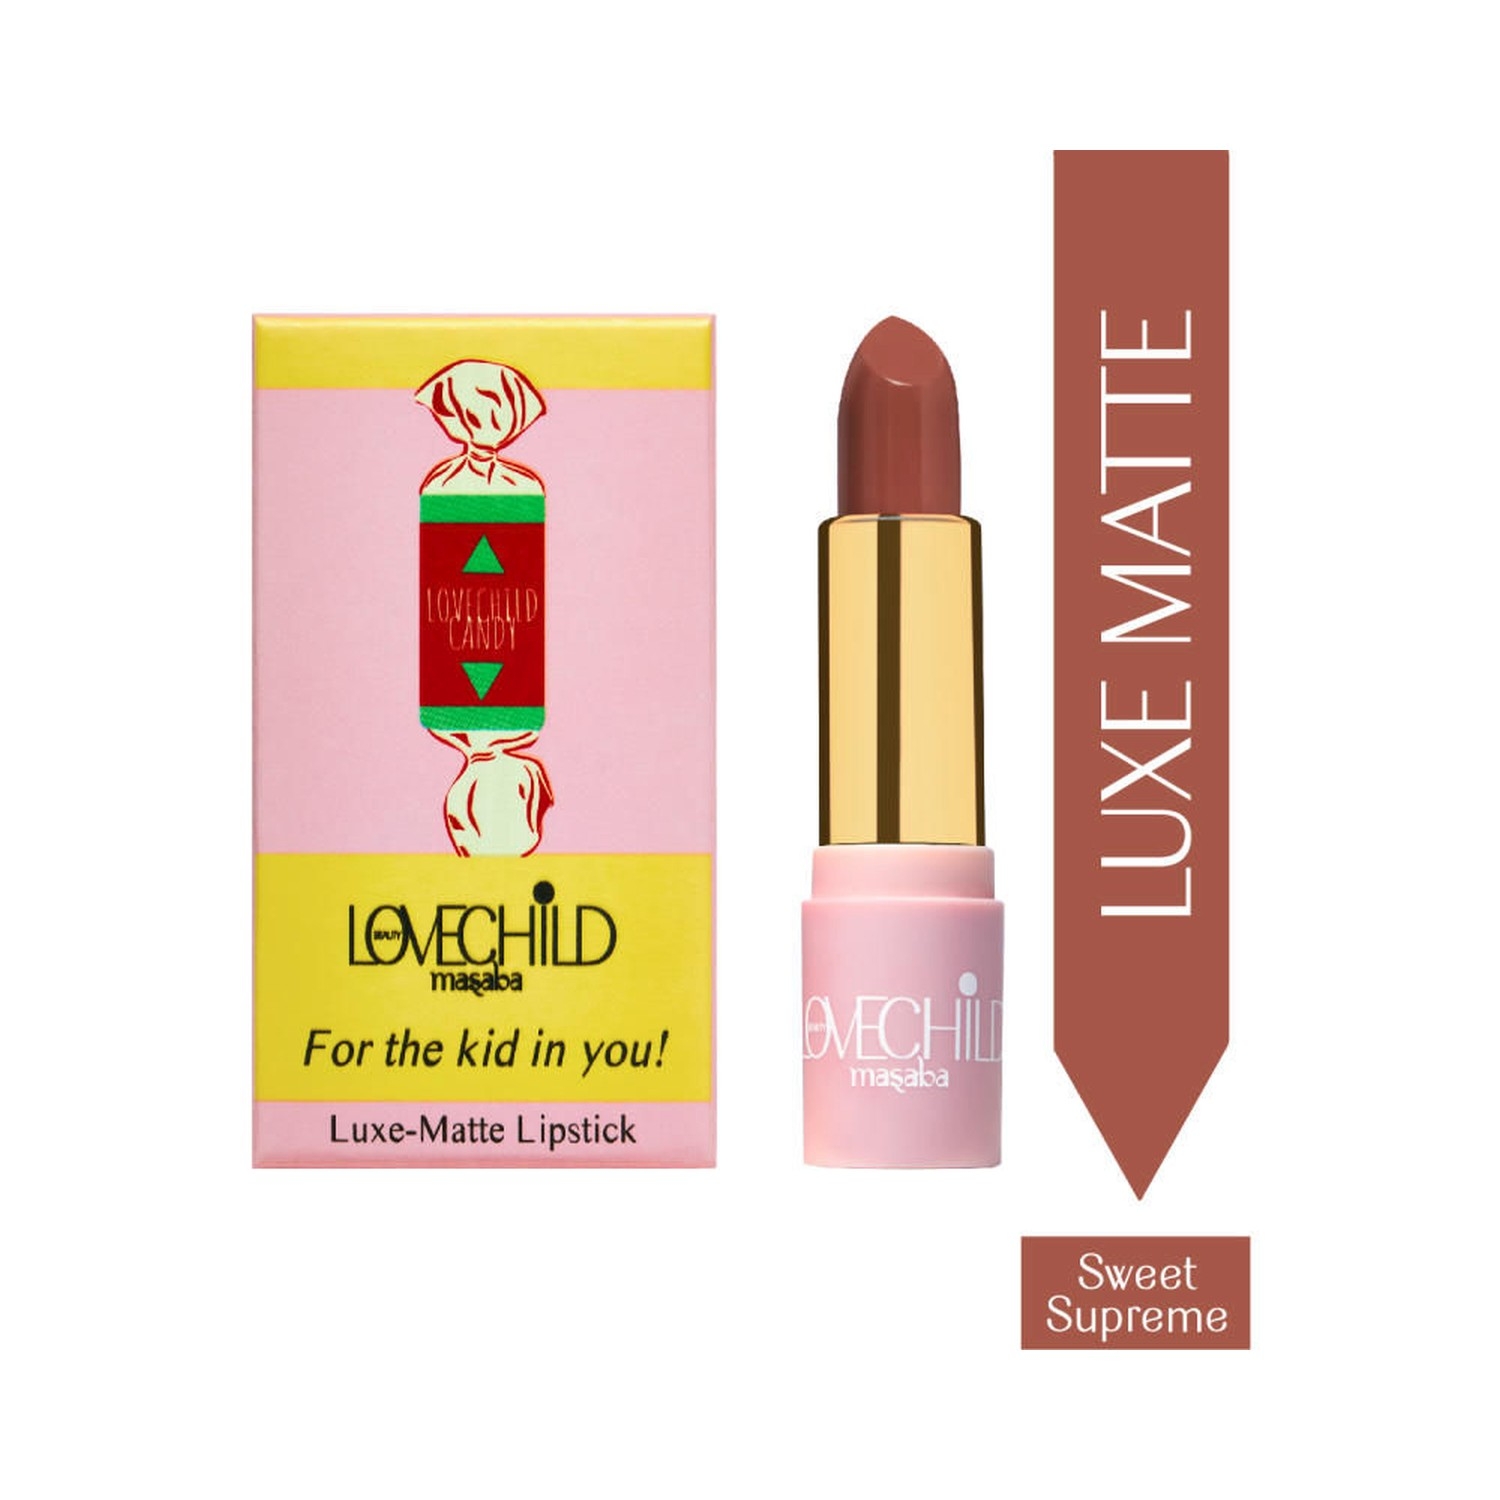 LoveChild Masaba | LoveChild Masaba For The Kid In You! Luxe Matte Lipstick - 03 Sweet Supreme (4g)